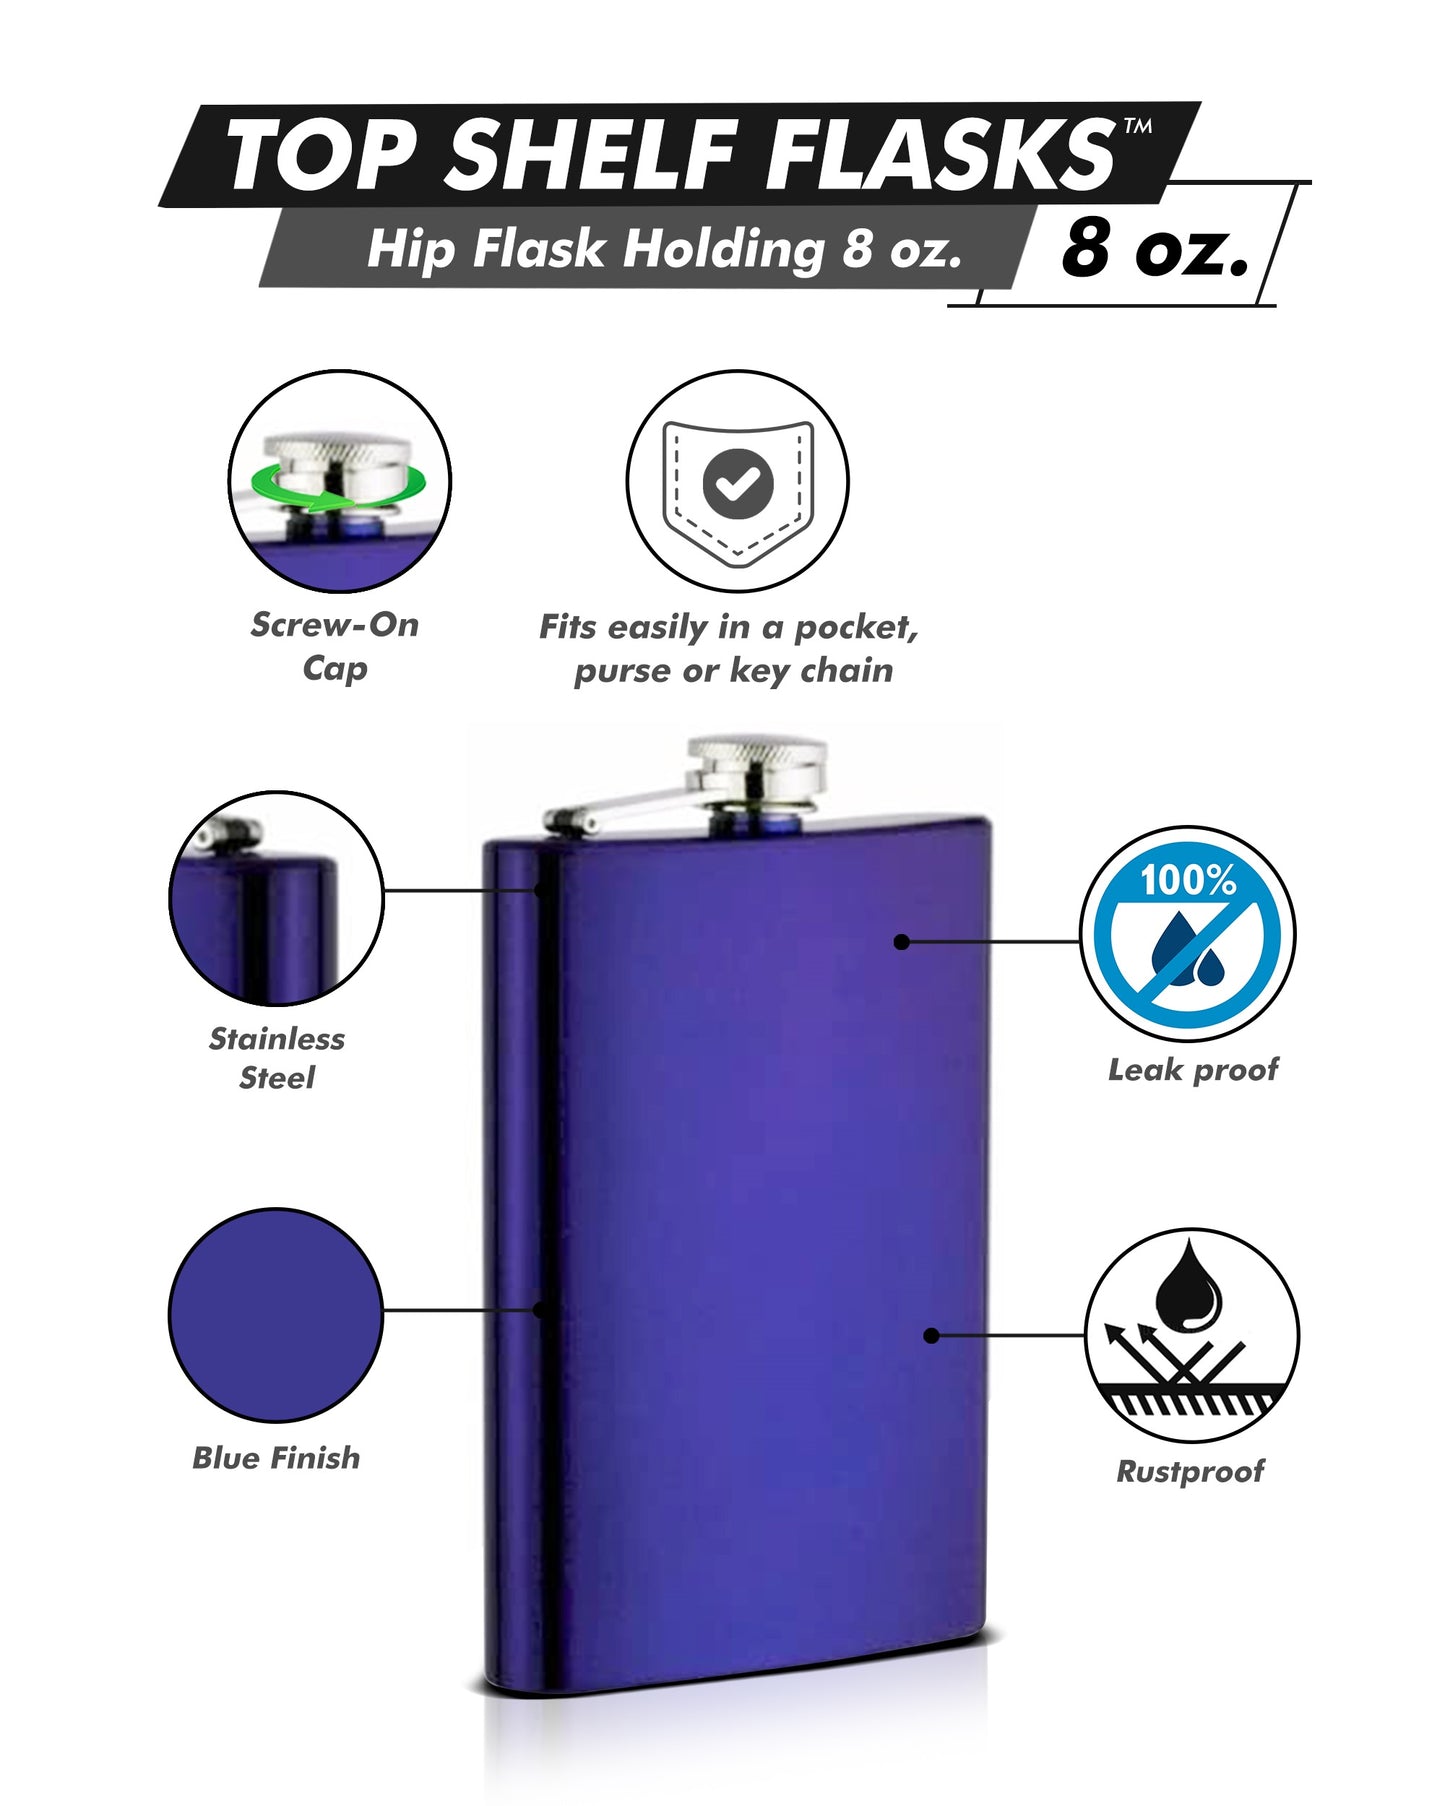 Electric Blue Powder Coated 8oz Painted Hip Flask Engraved